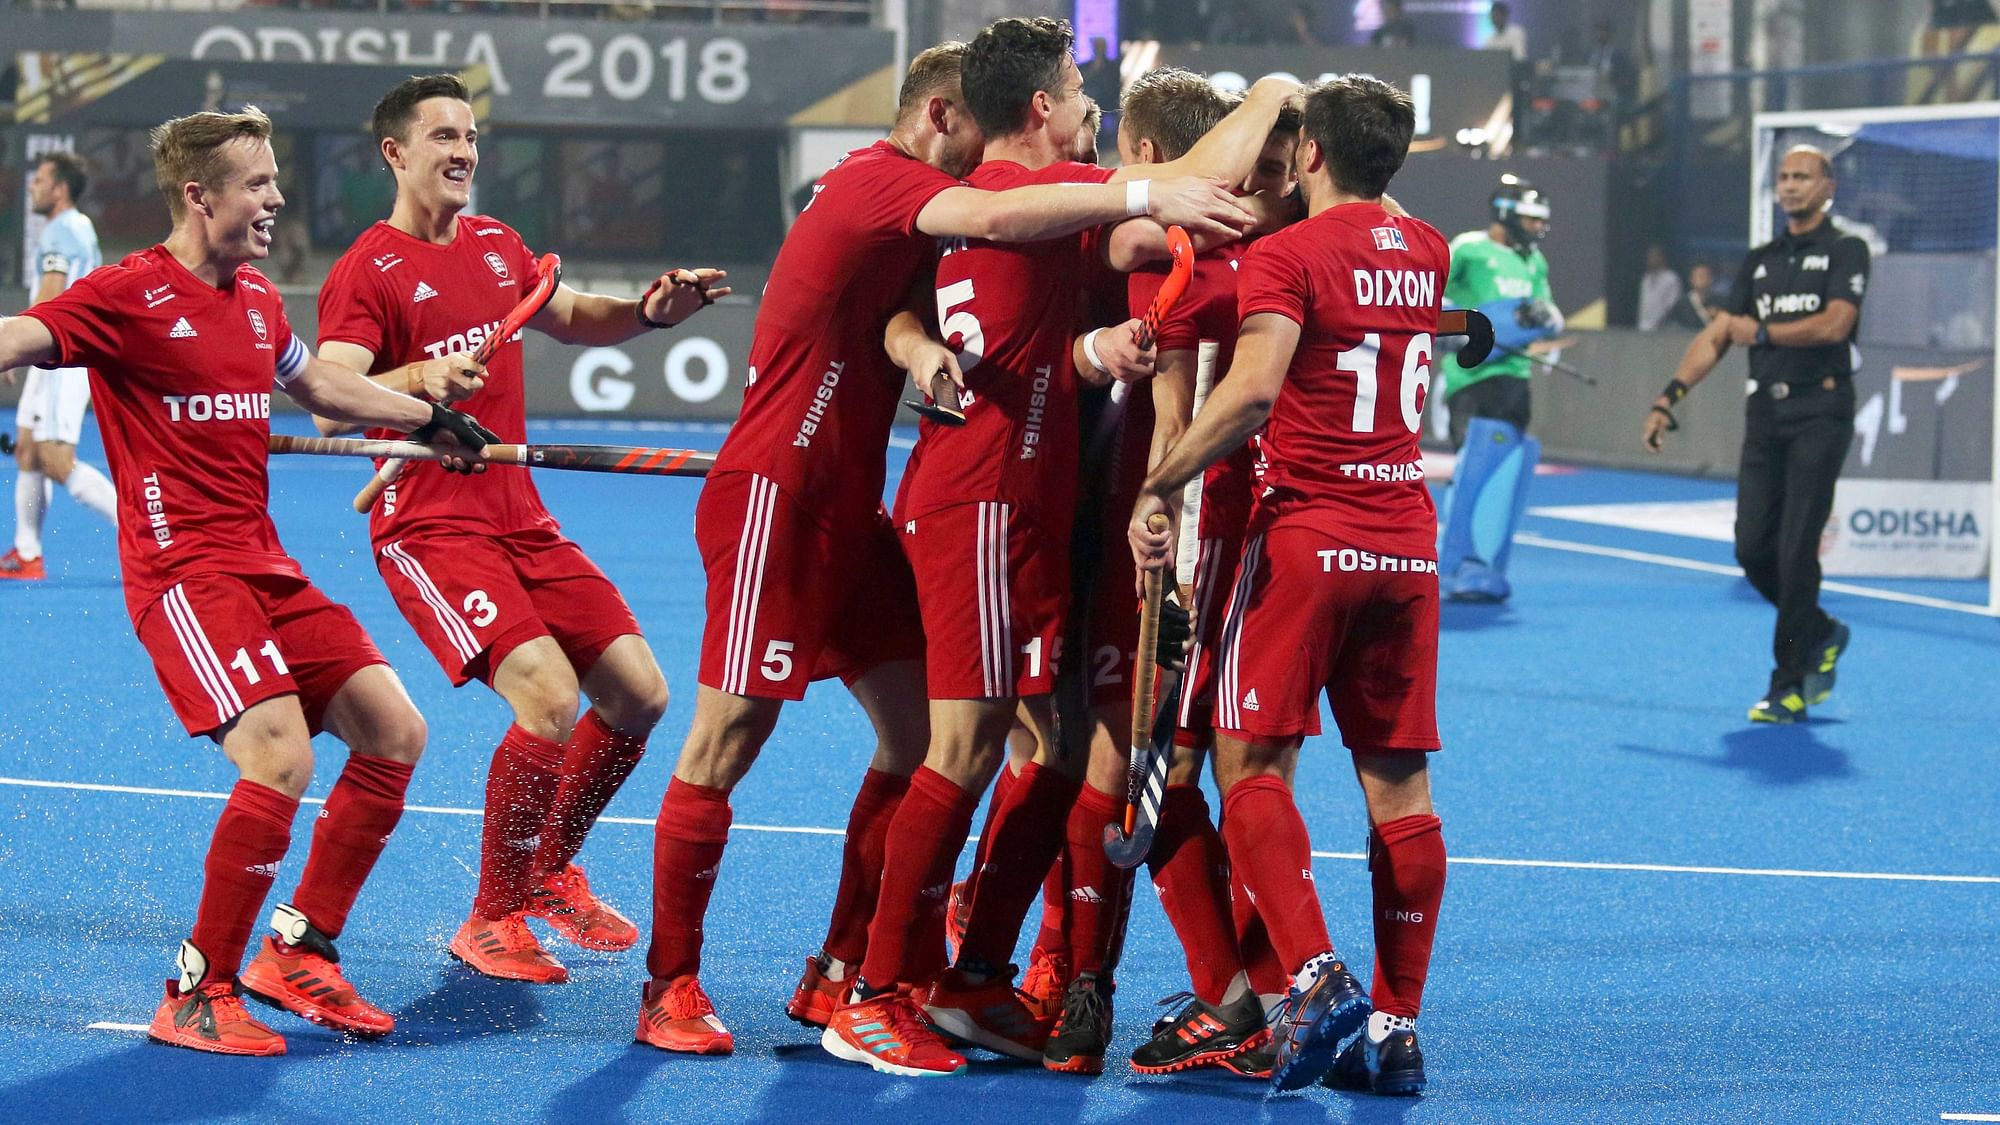 England stunned Olympic champions Argentina 3-2 to book their place in the semi-finals of the 14th men’s Hockey World Cup.